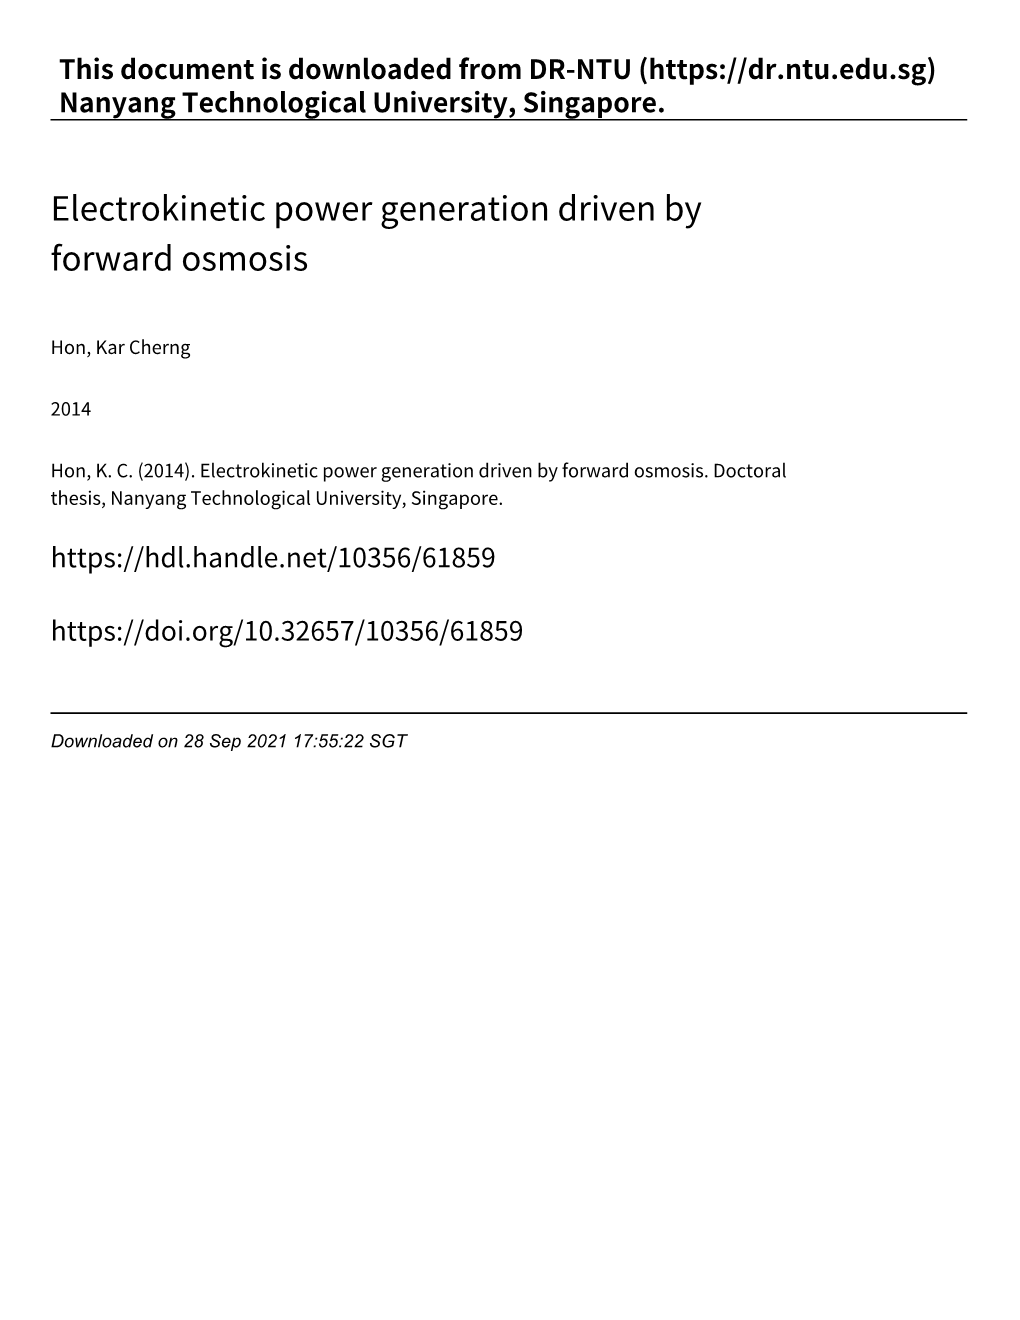 Electrokinetic Power Generation Driven by Forward Osmosis